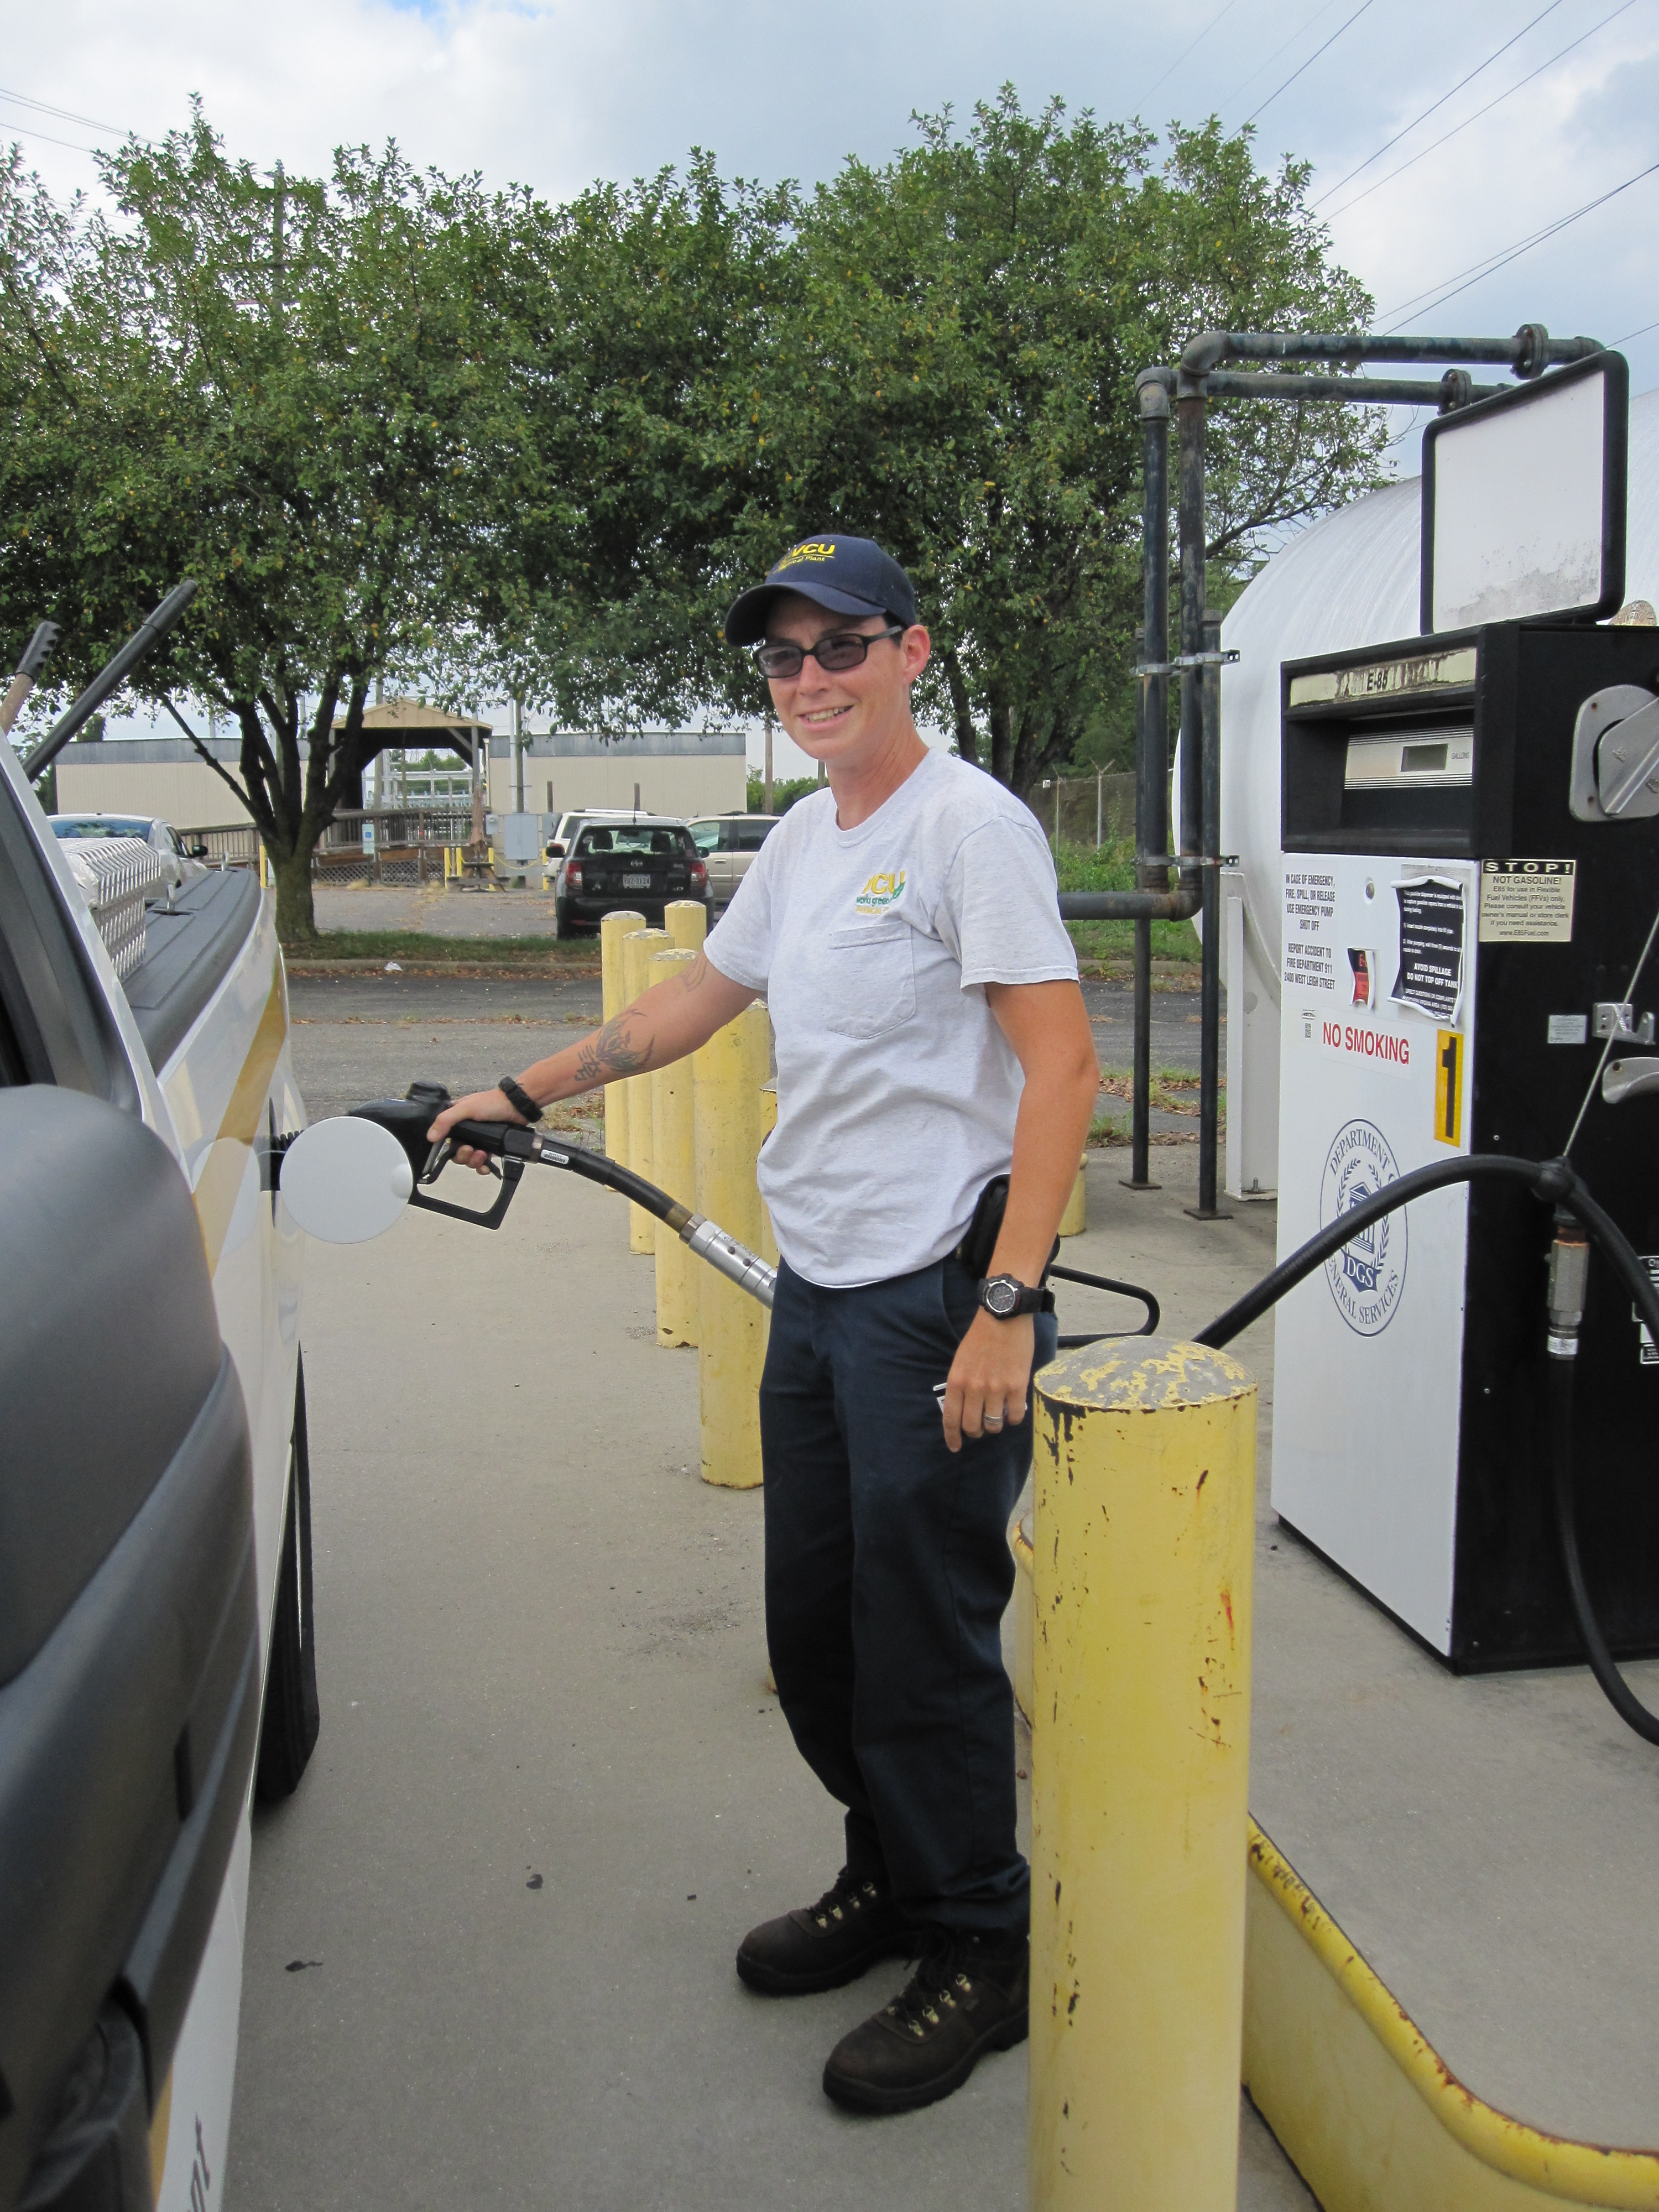 VCU employee pumping gas at Department of General Services Fuel Site